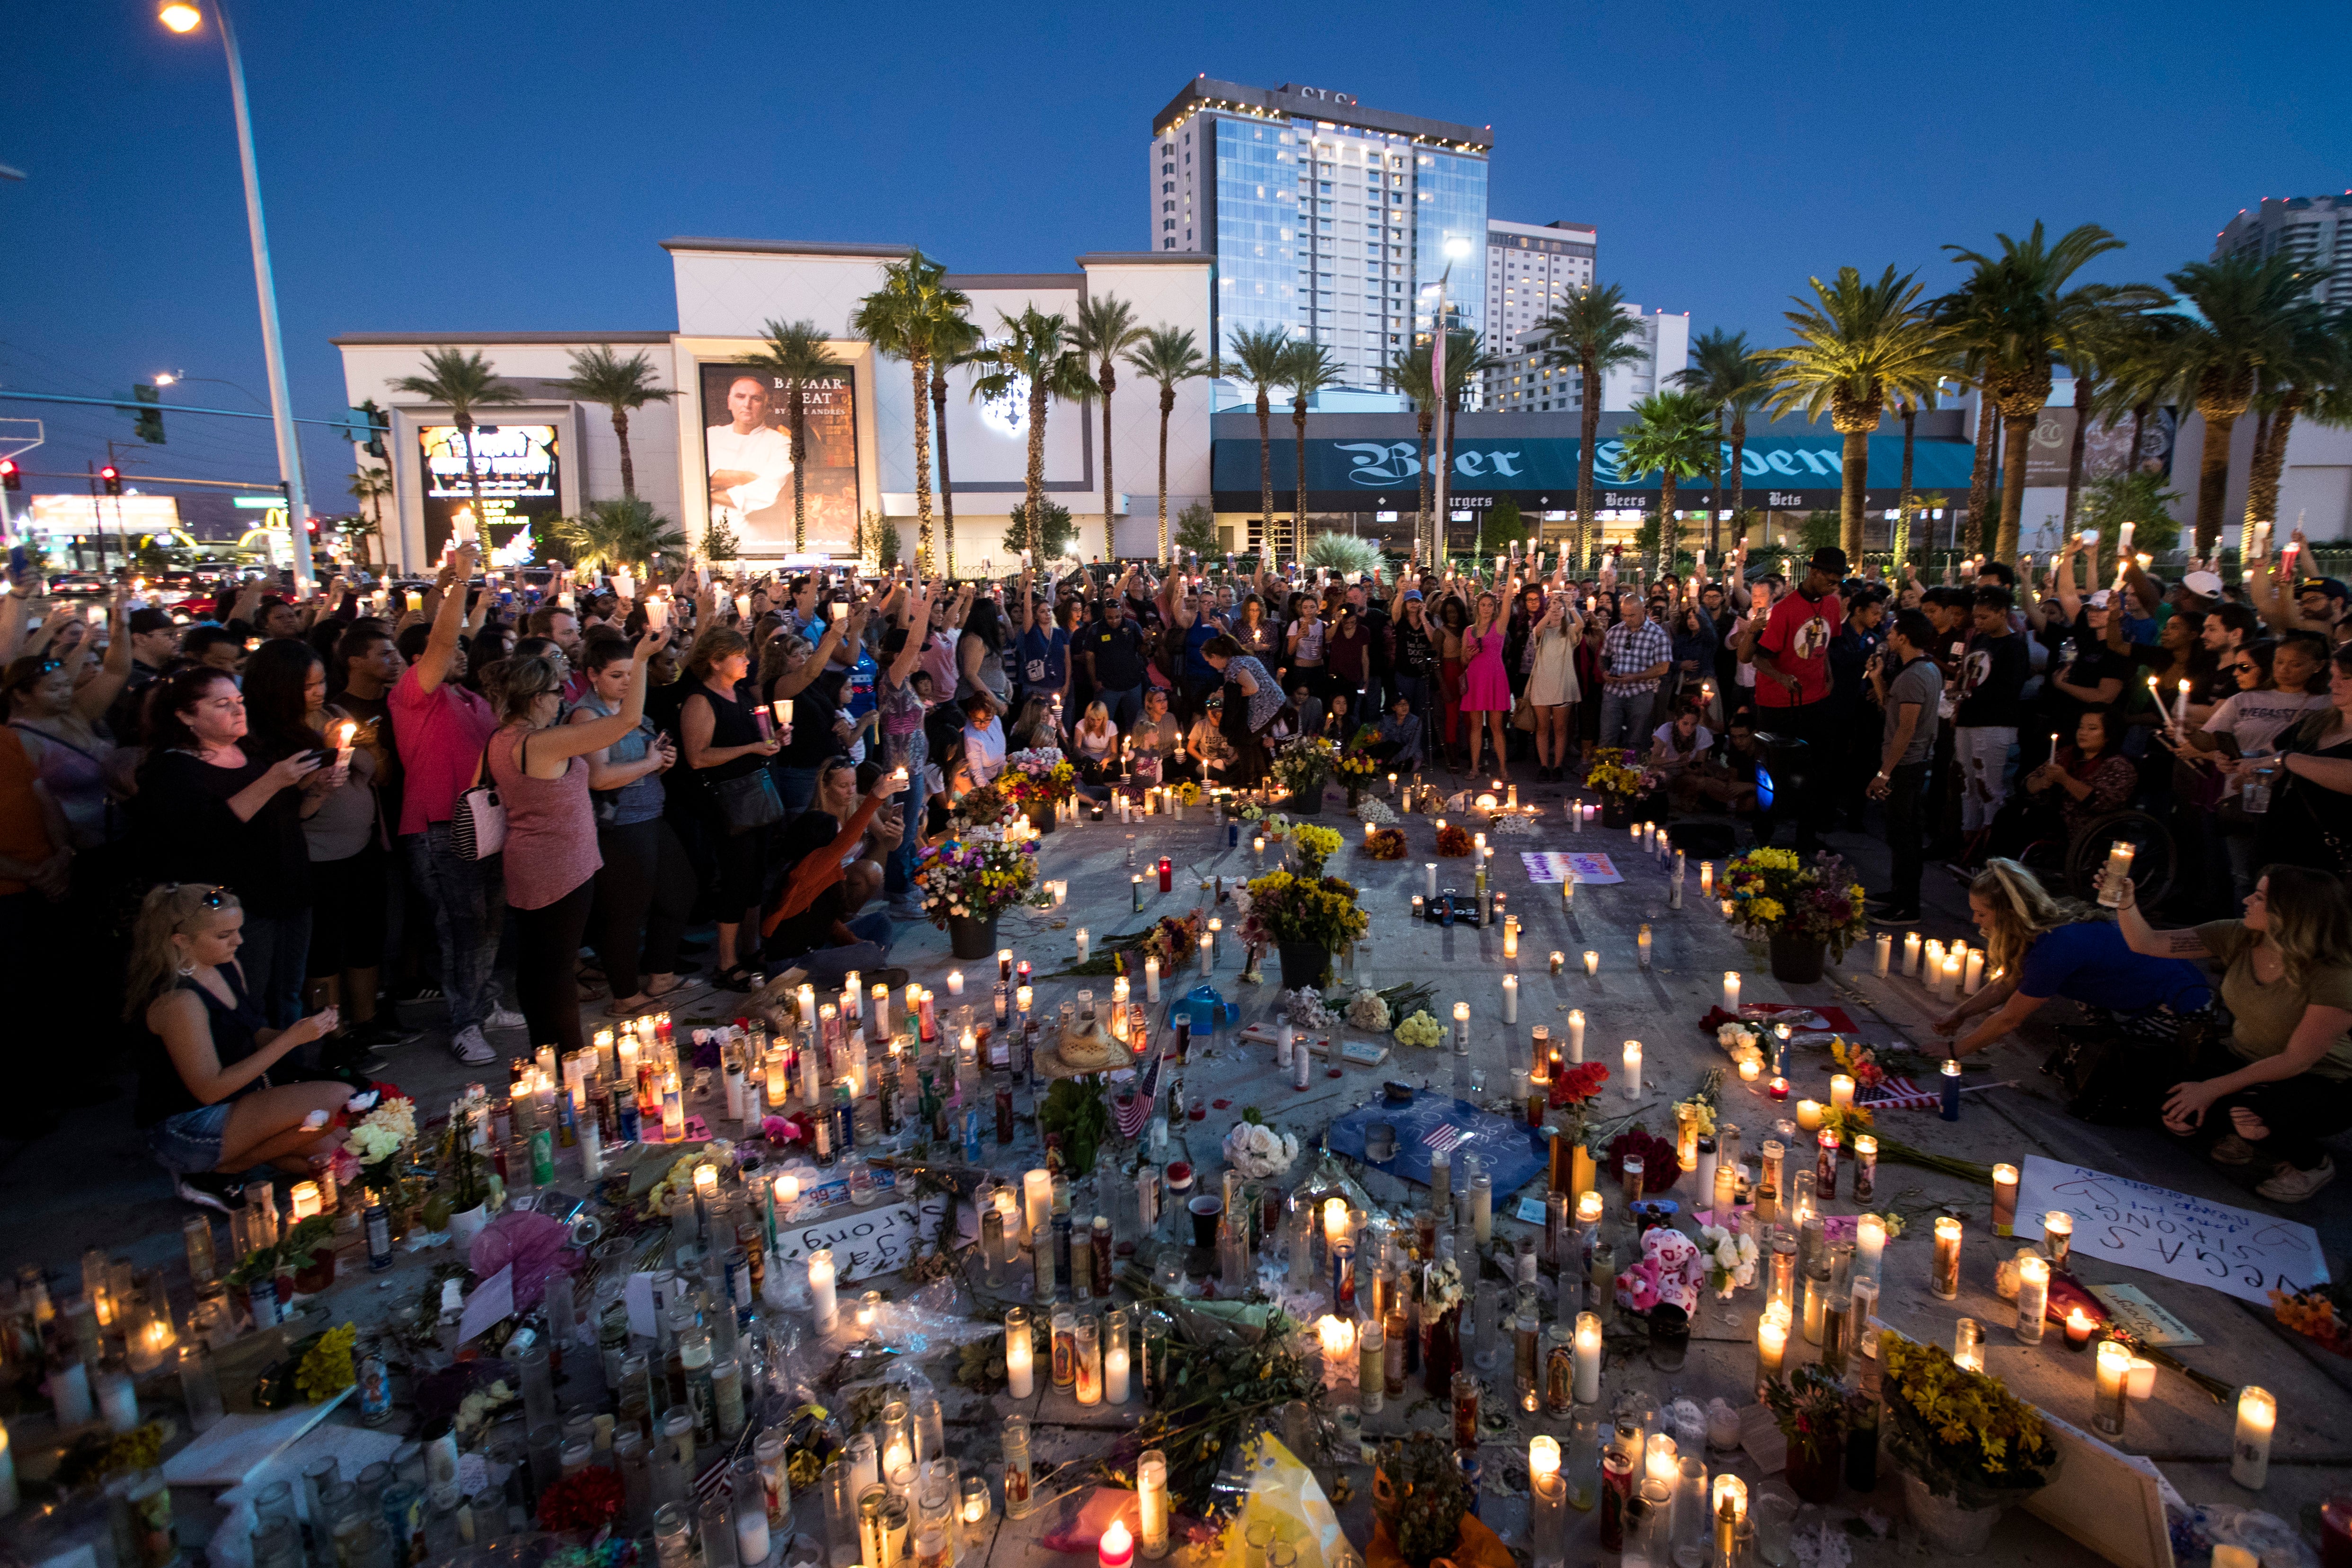 Here Are The 5 Deadliest Mass Shootings In Modern U.S History
